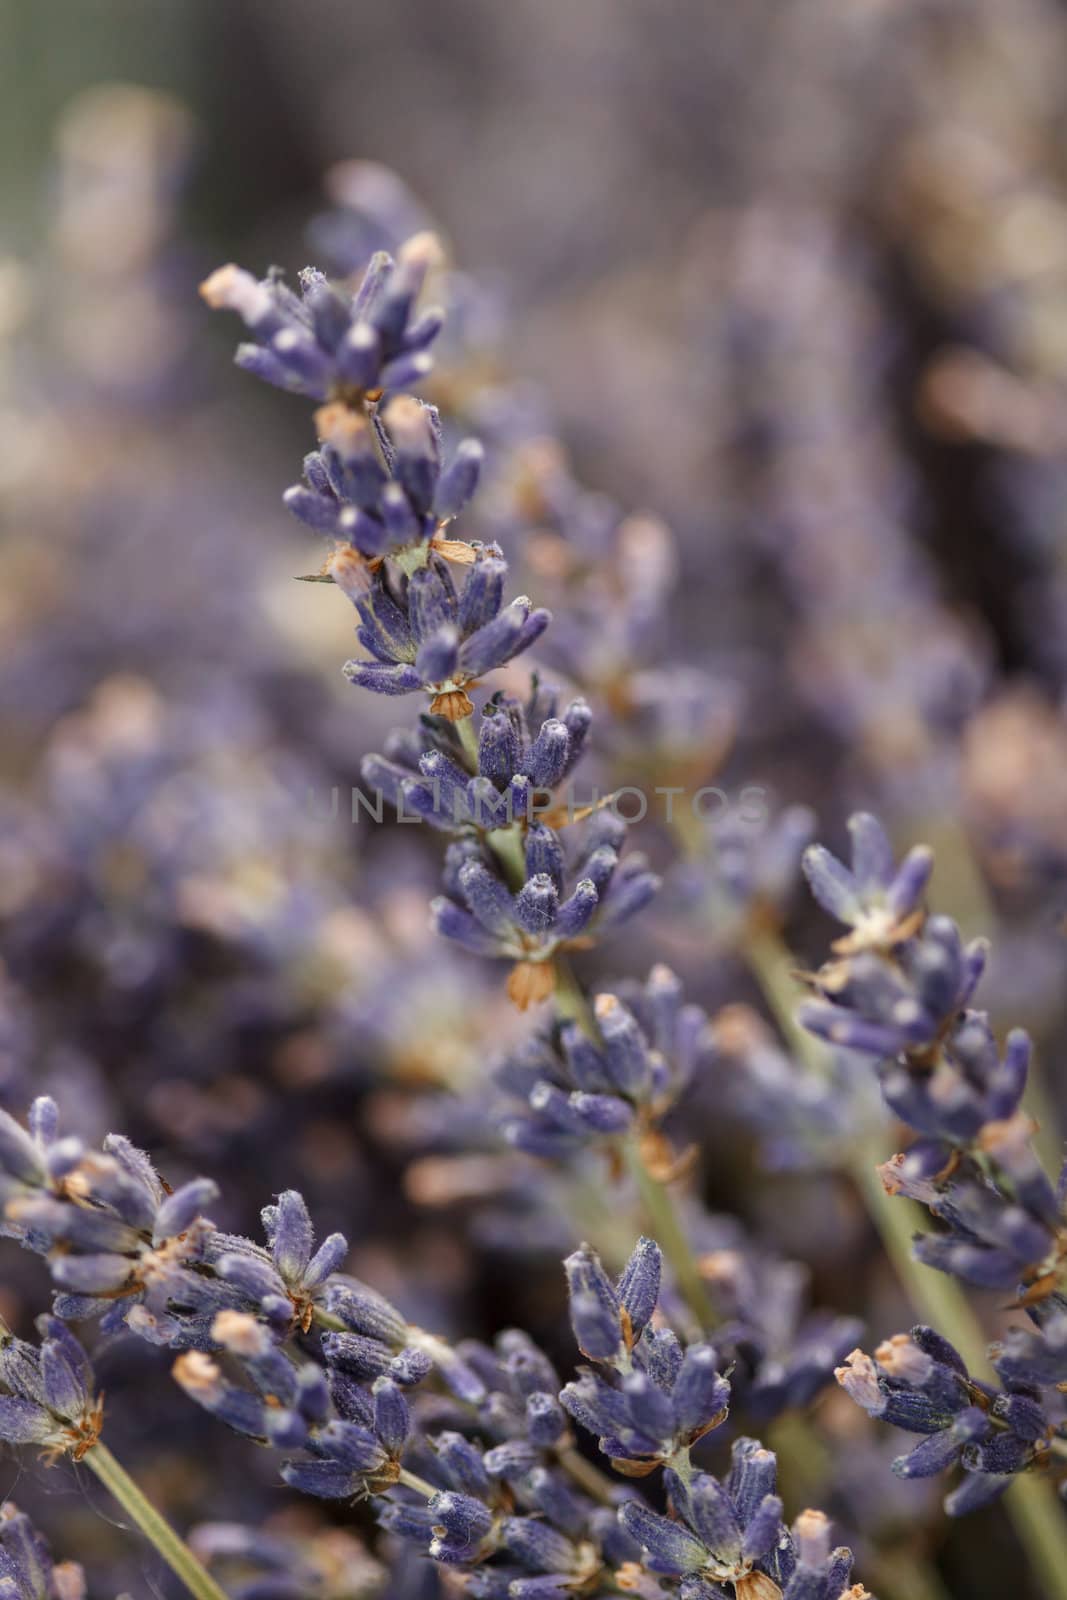 Dried lavender flowers by shebeko